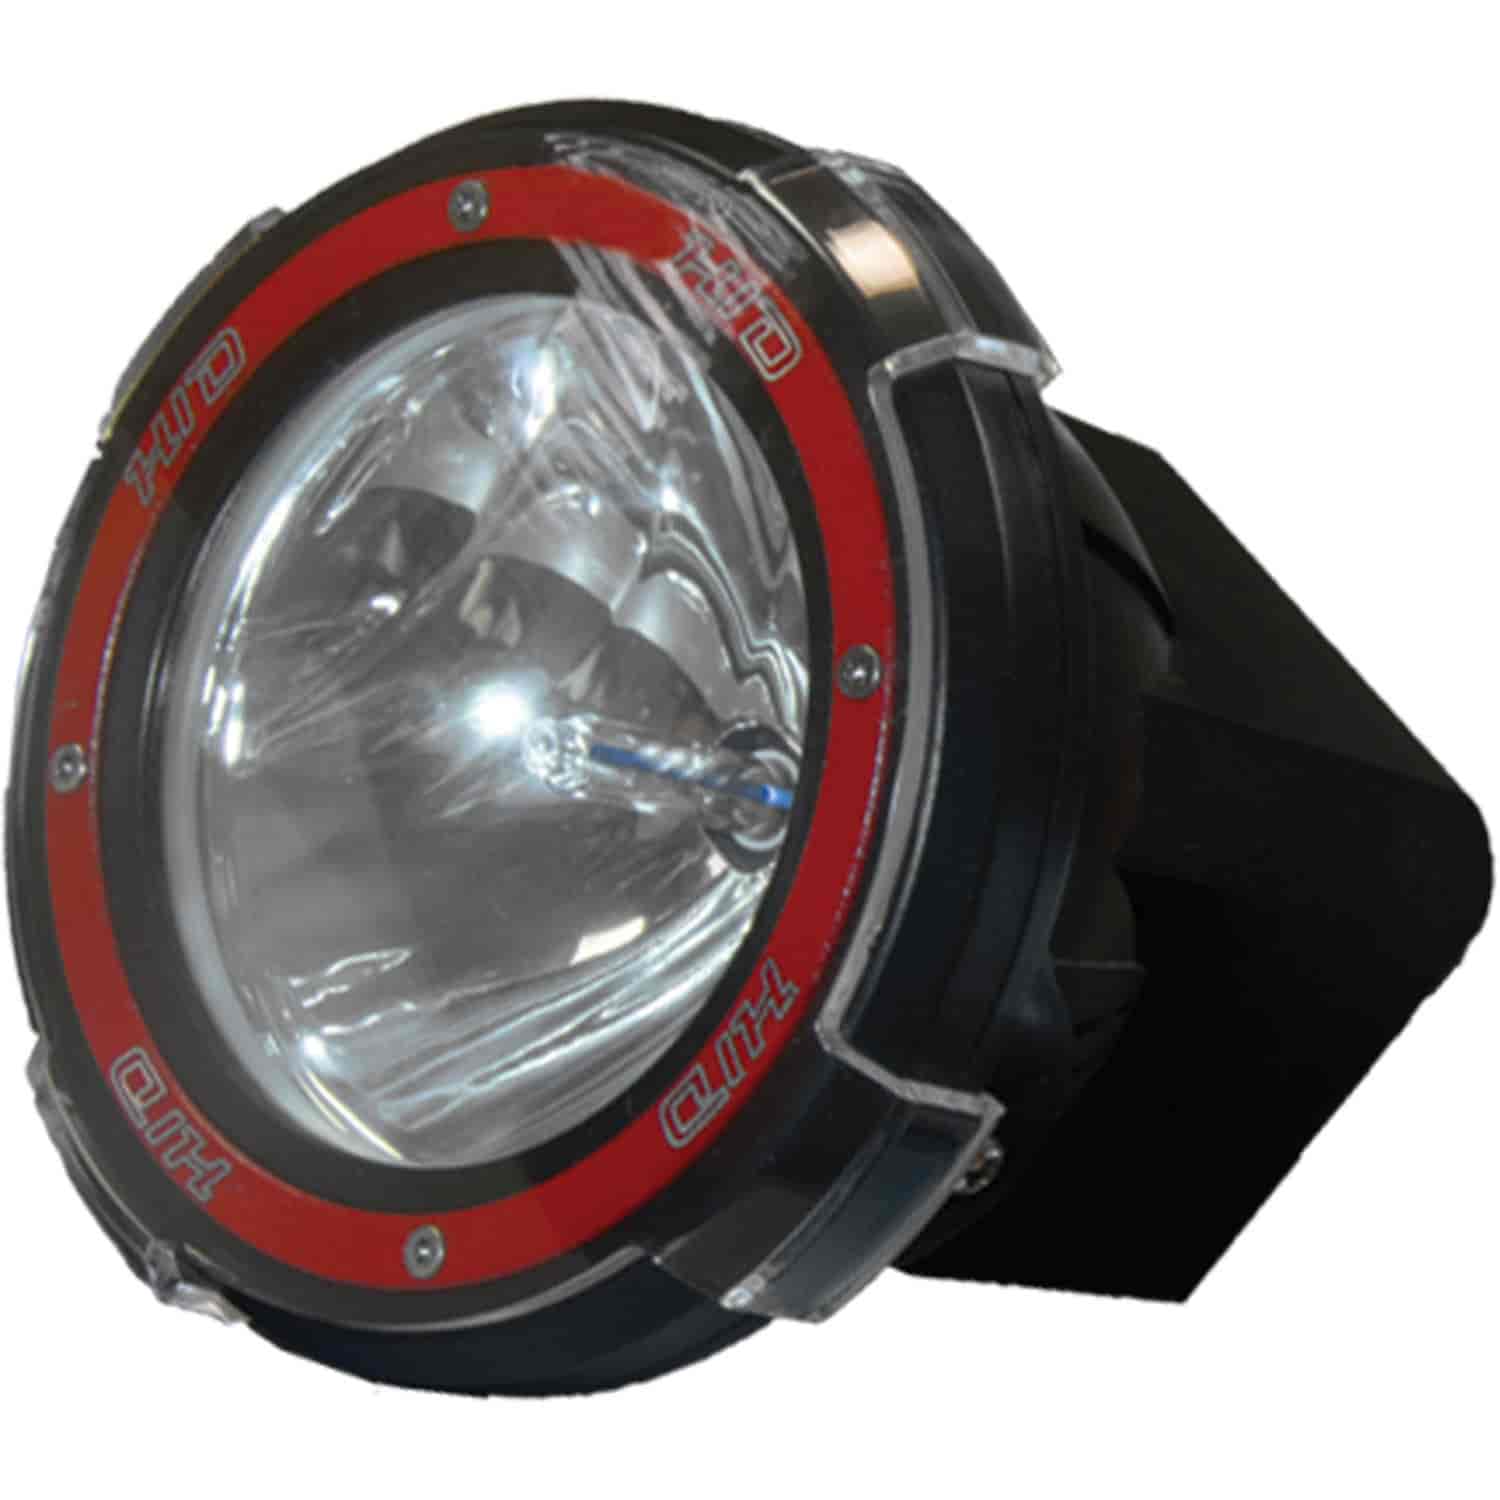 A10 HID Off-Road Light This 4" round light uses a Xenon HID bulb